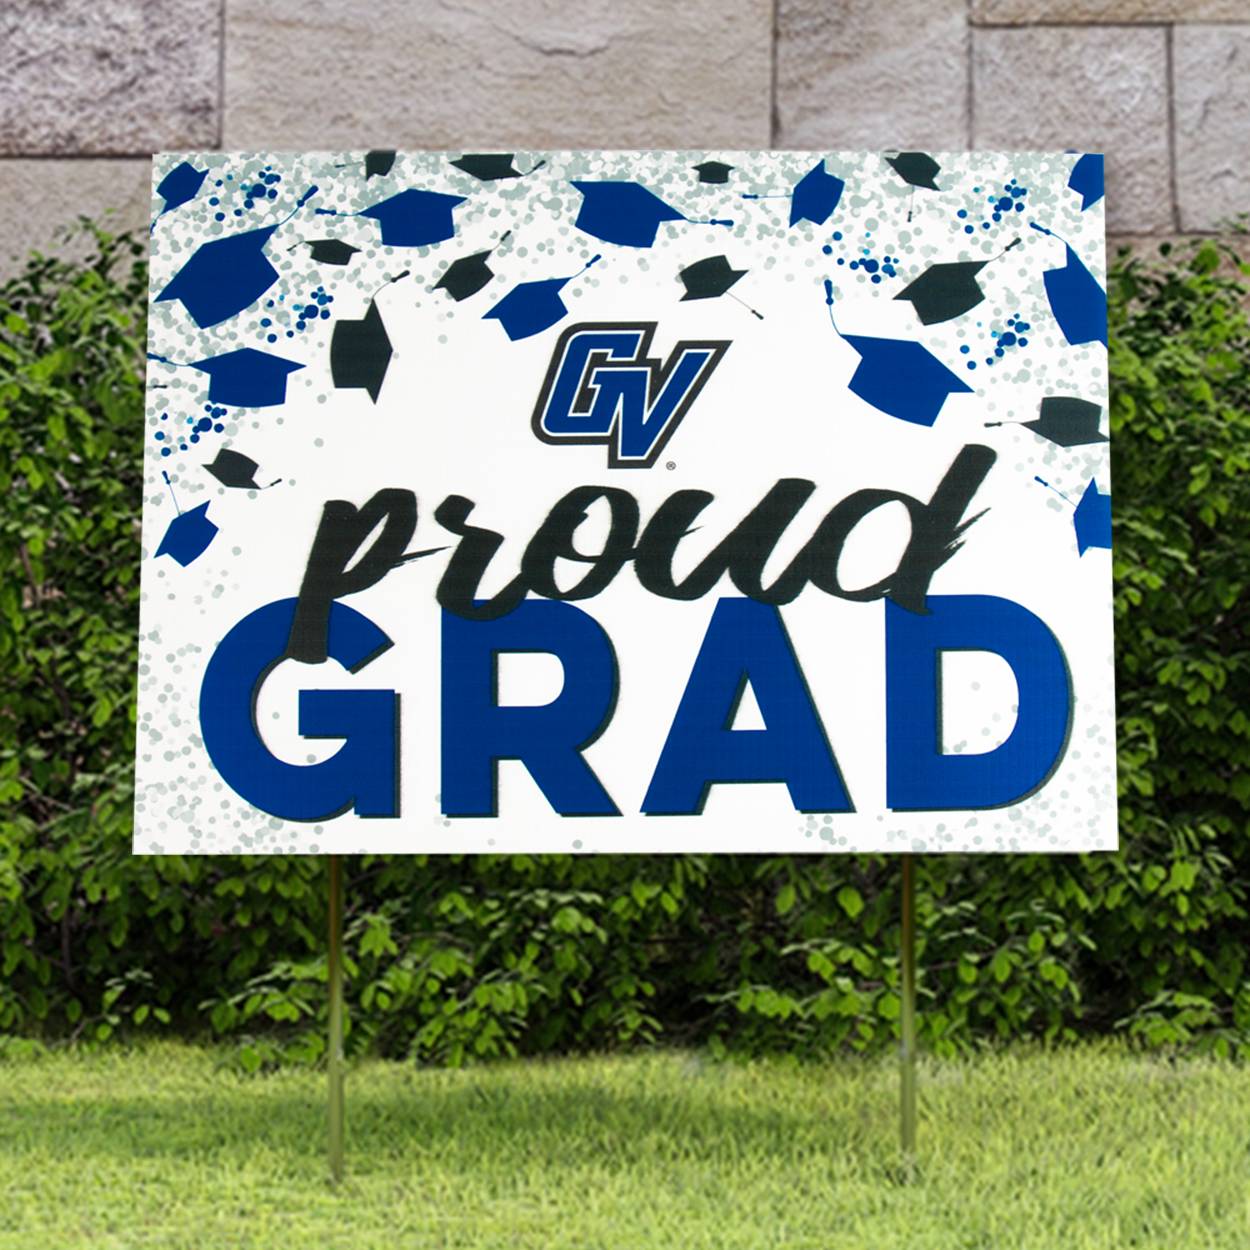 Proud GV Grad yard sign displayed in the grass with graphic of grad cap